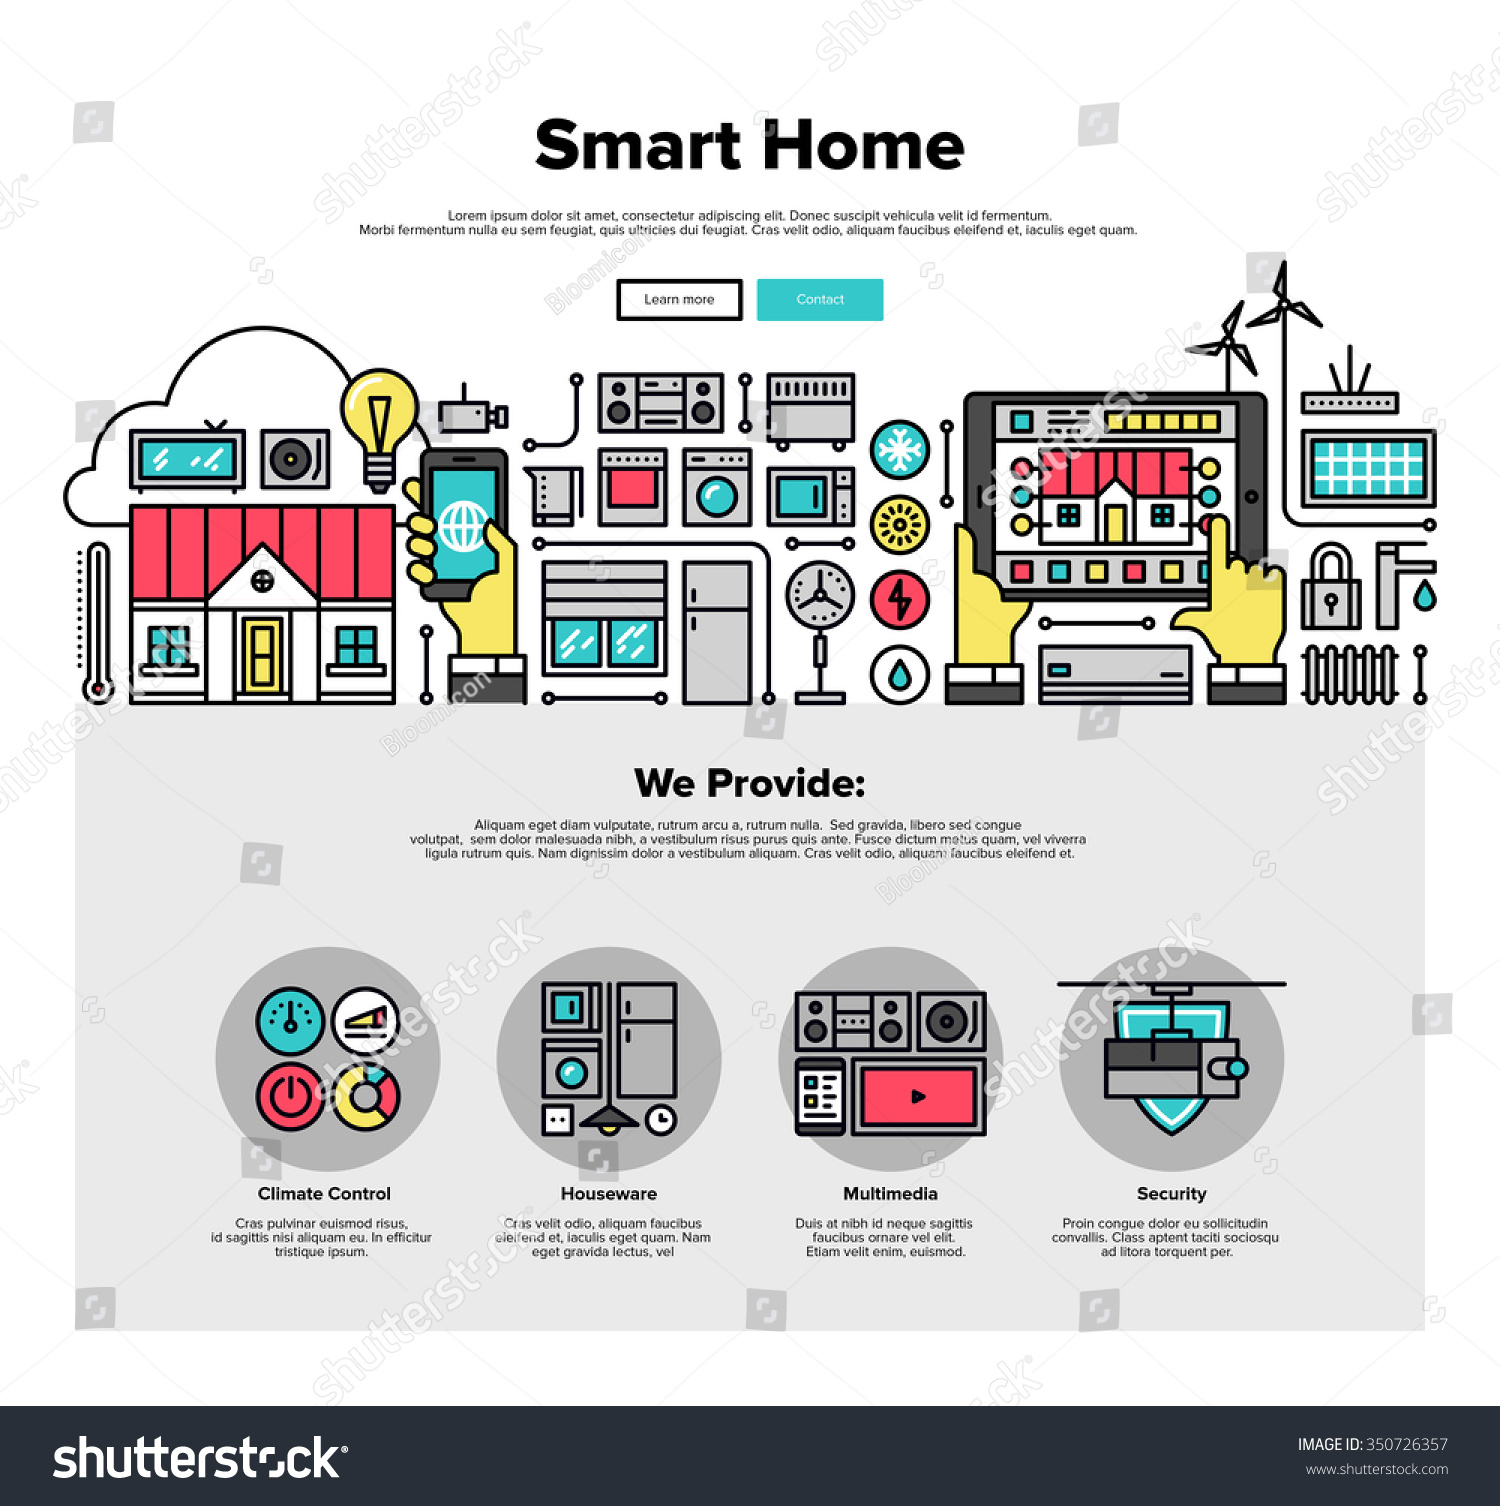 stock-vector-one-page-web-design-template-with-thin-line-icons-of-smart-home-automation-system-smart-house-350726357.jpg